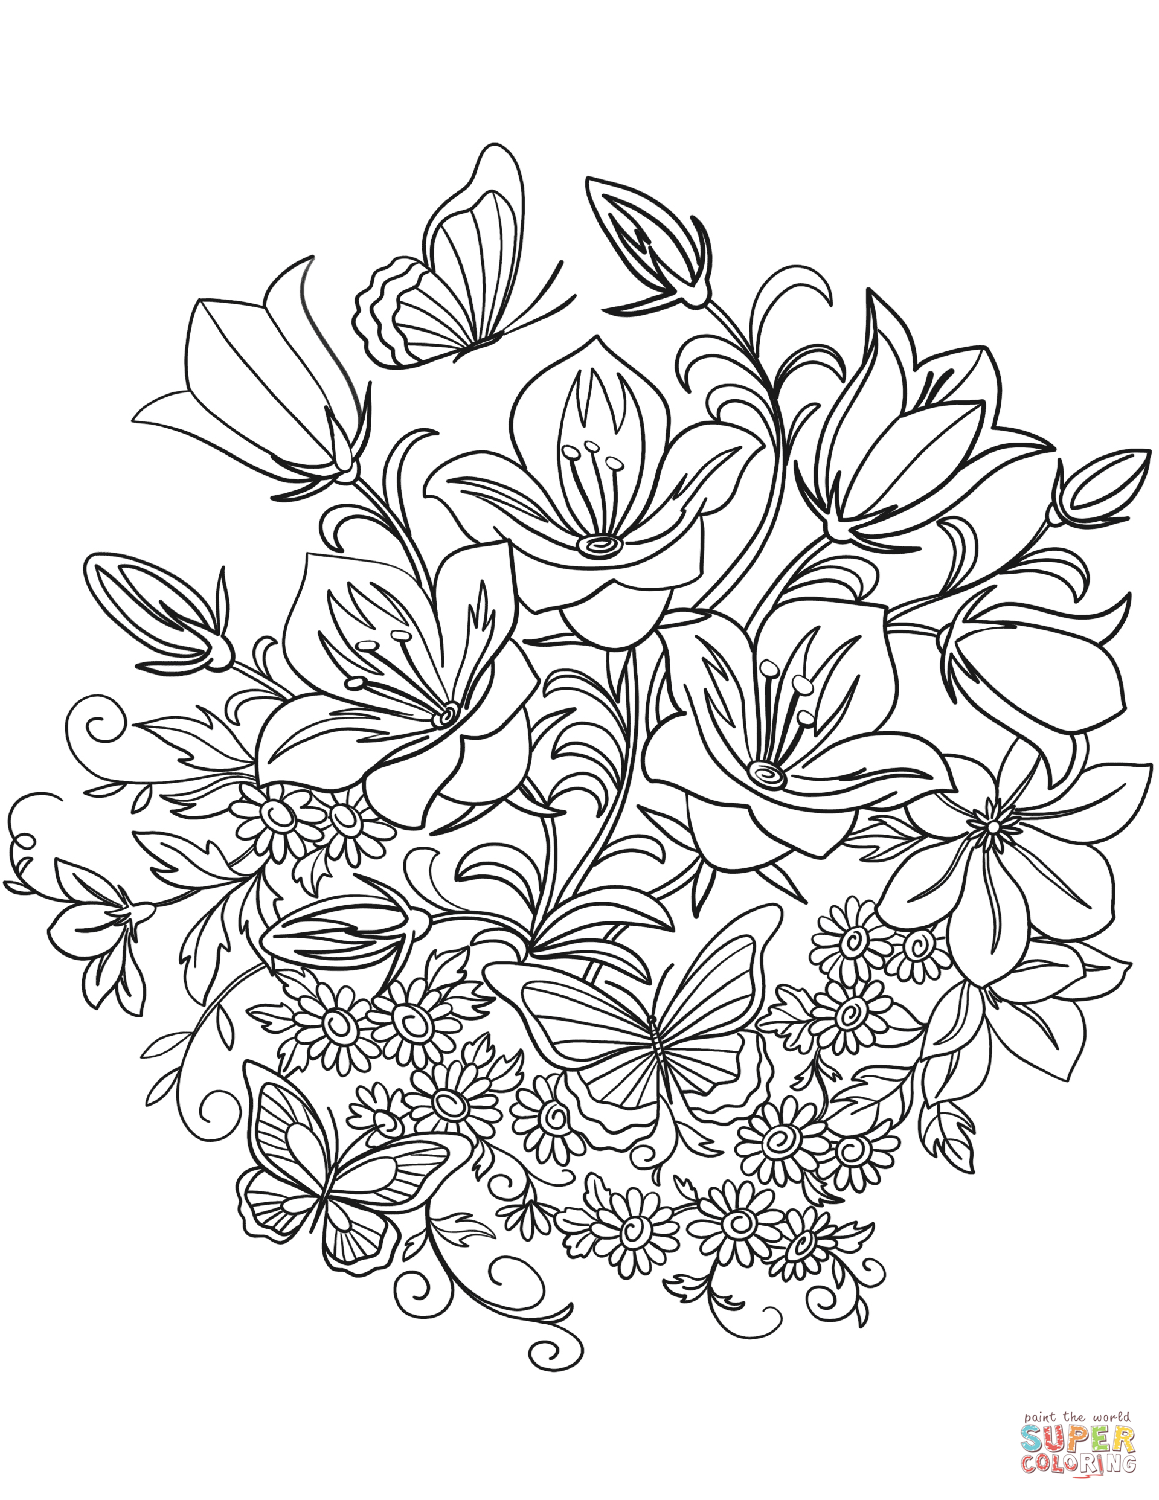 Butterfly and flowers coloring page free printable coloring pages